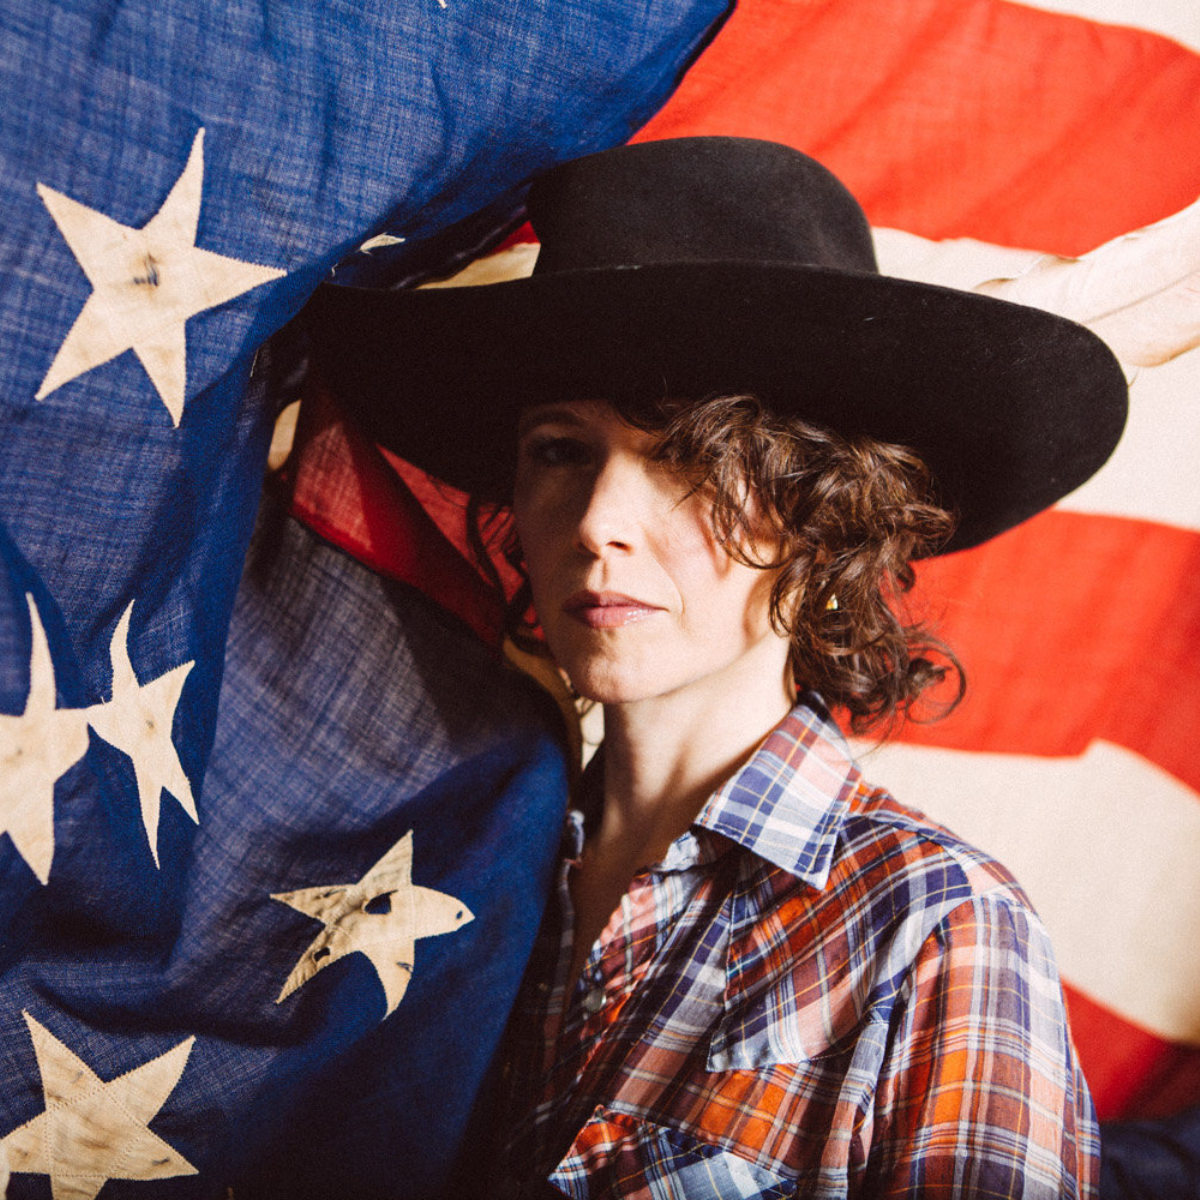 Coming to AMERICANAFEST? Don't Miss These Parties Presented by BGS